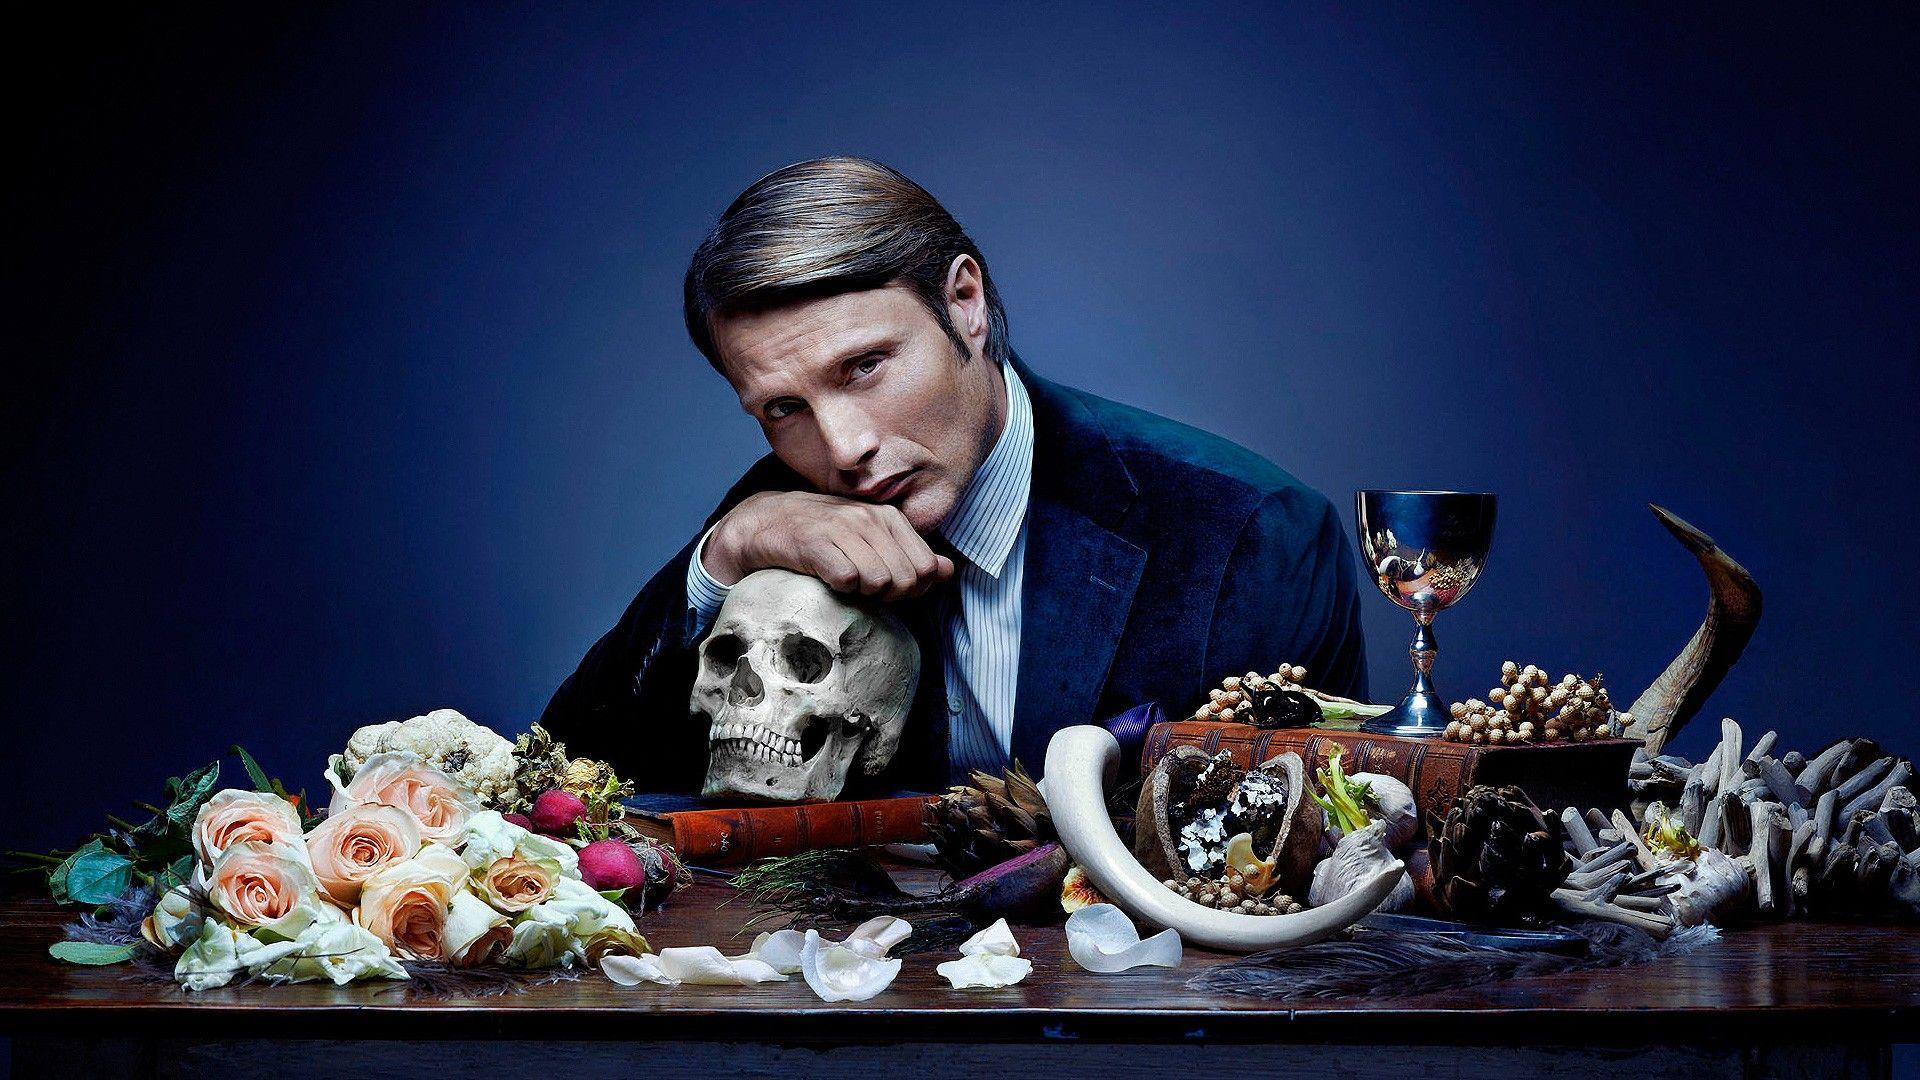 These are some Hannibal phone wallpapers I found  rHannibalTV